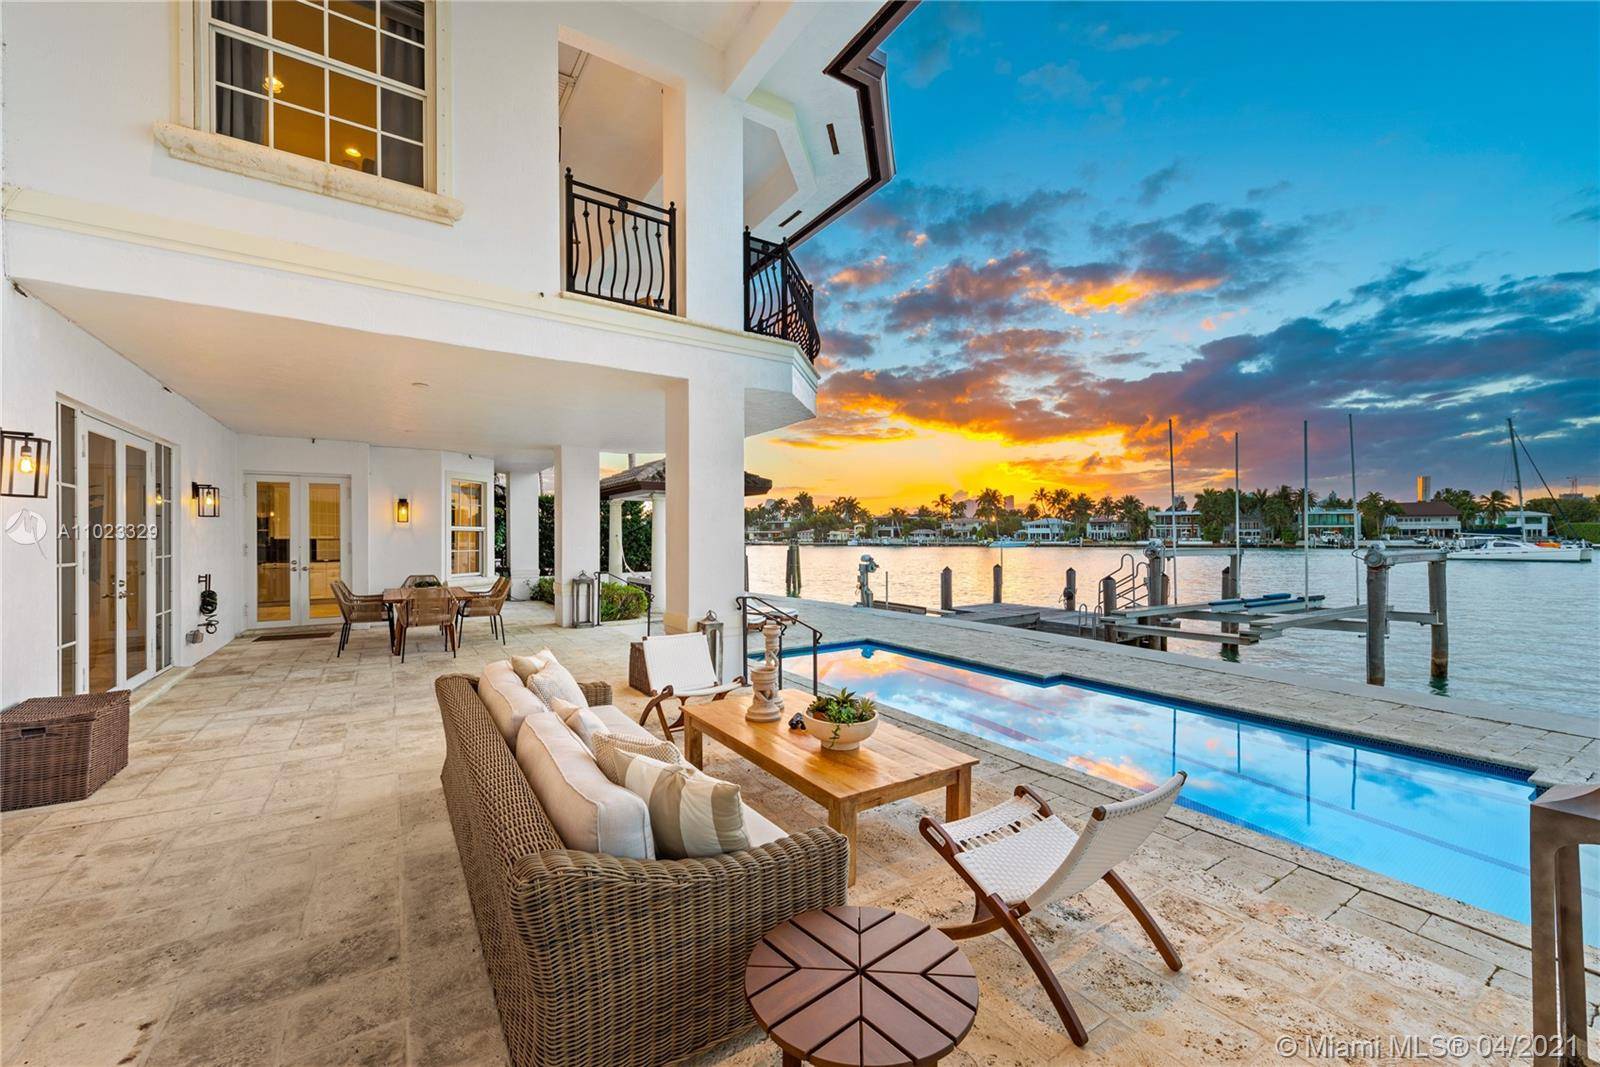 Opportunity to rent this beautiful Mediterranean waterfront home located on NorthWest tip of Rivo Alto island with amazing sunset views, walking distance to Standard Hotel, Sunset Harbor shops and restaurants.